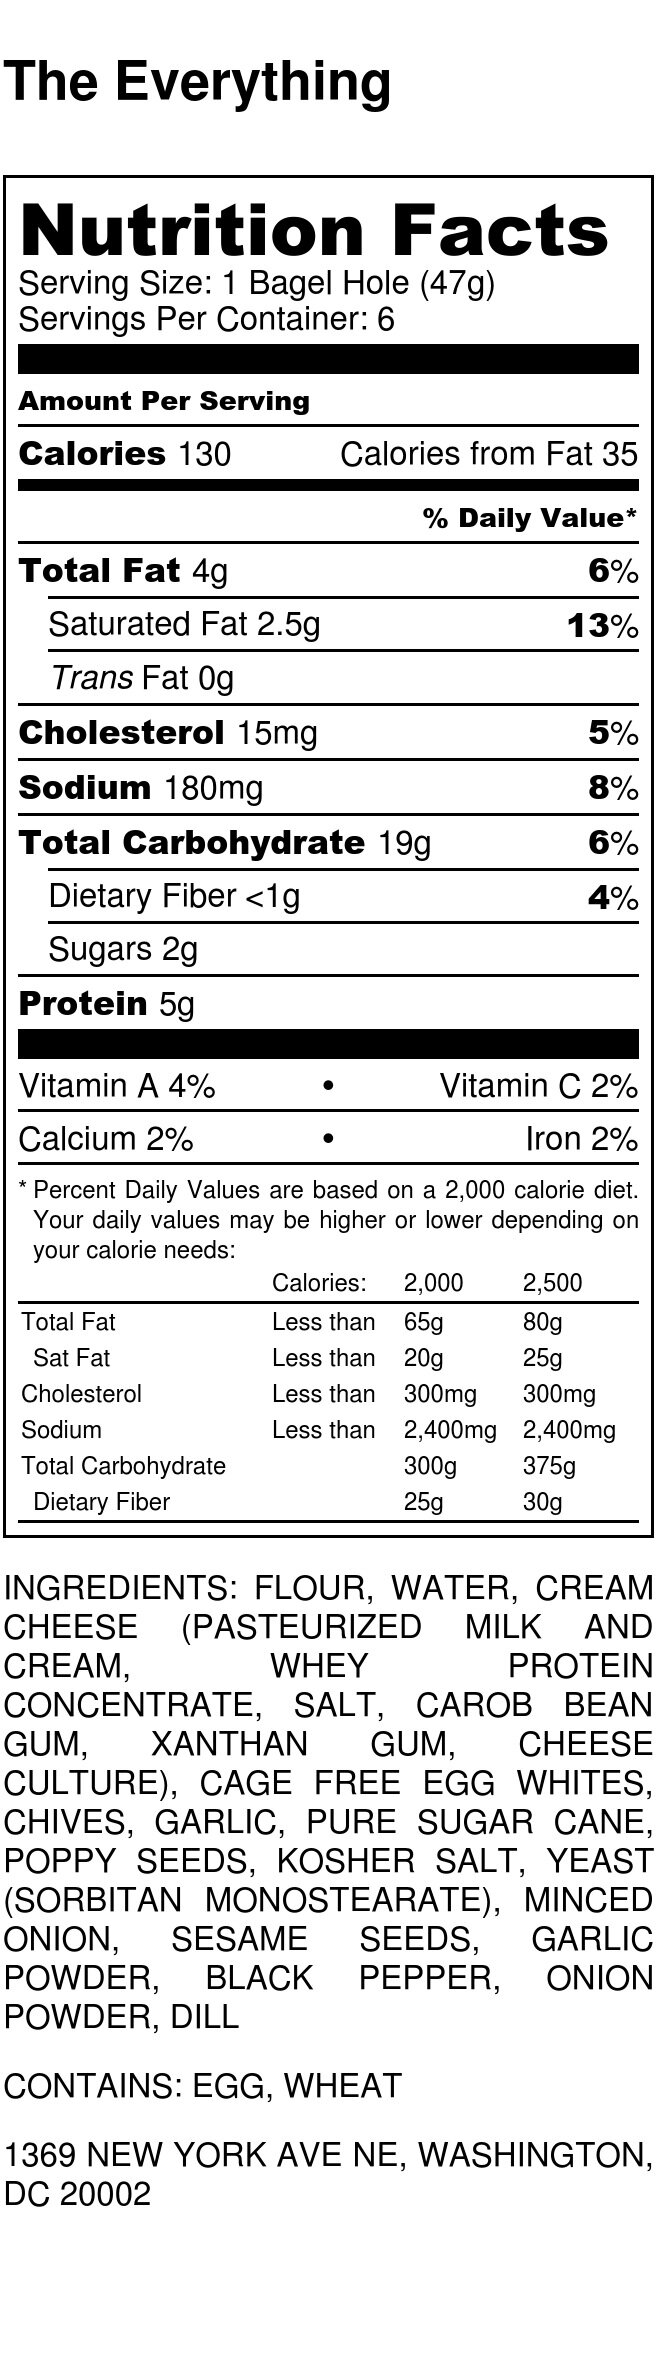 The Everything - Nutrition Label.jpg